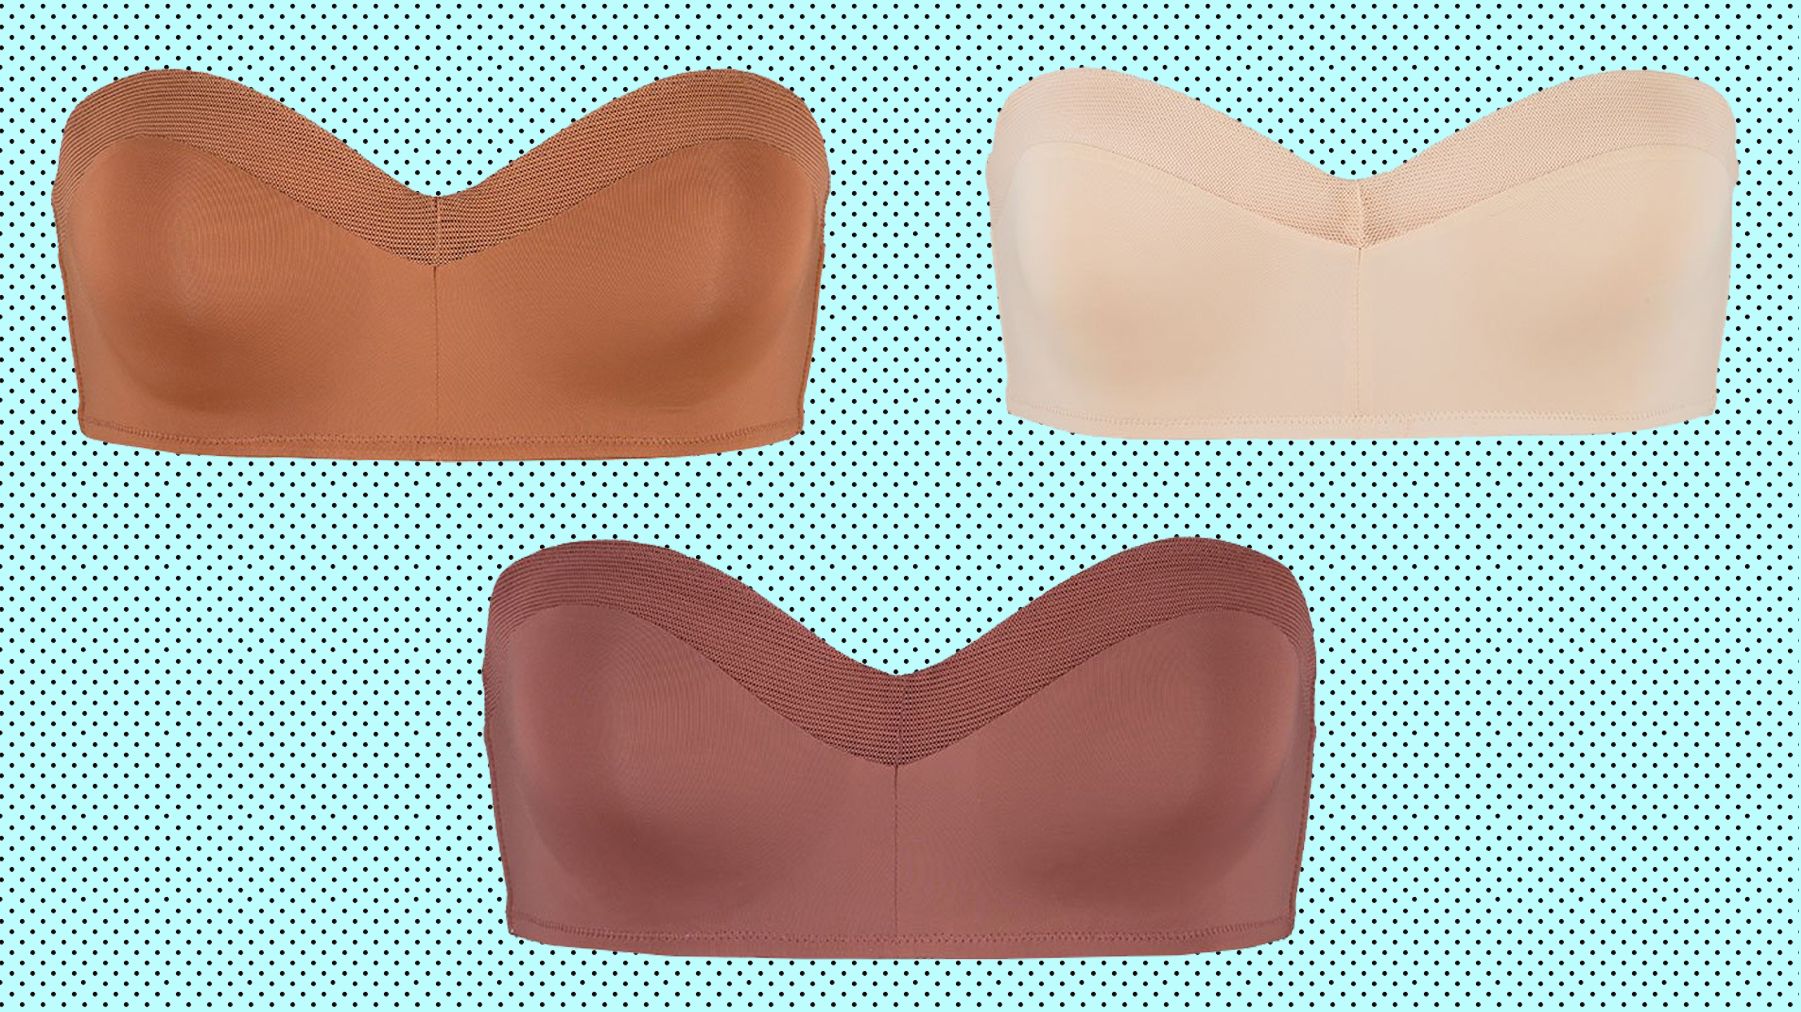 LIVELY Created a Line of Strapless Bras to Get You Through Holiday